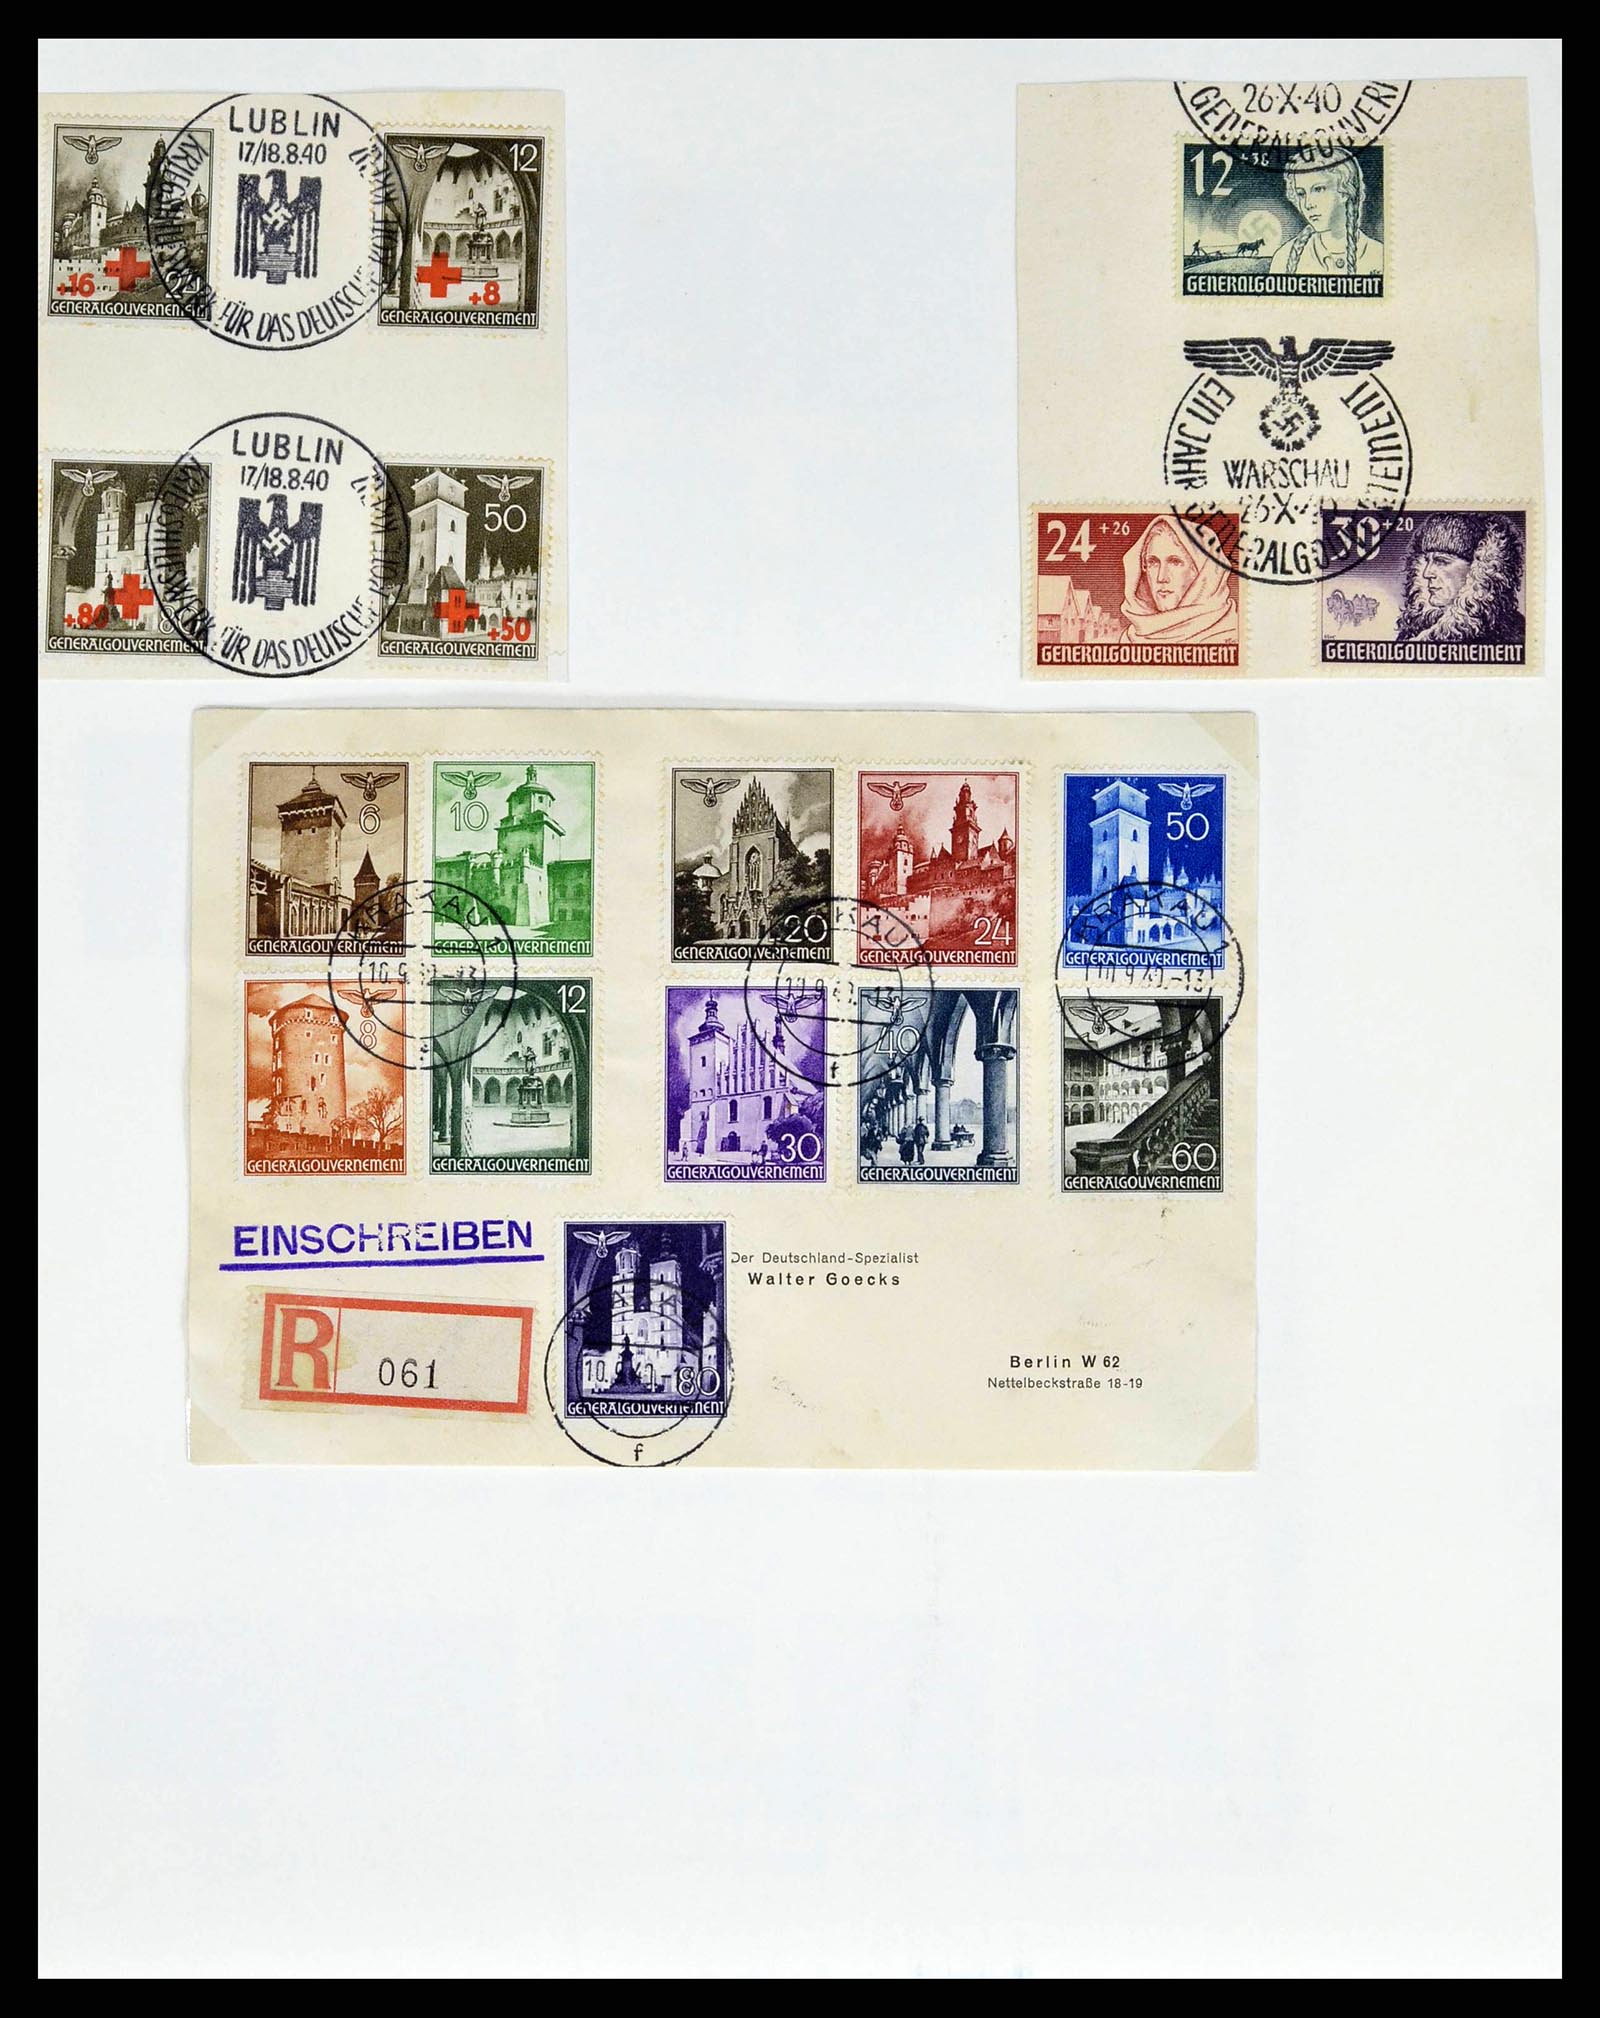 38505 0083 - Stamp collection 38505 German occupations 2nd world war 1939-1945.